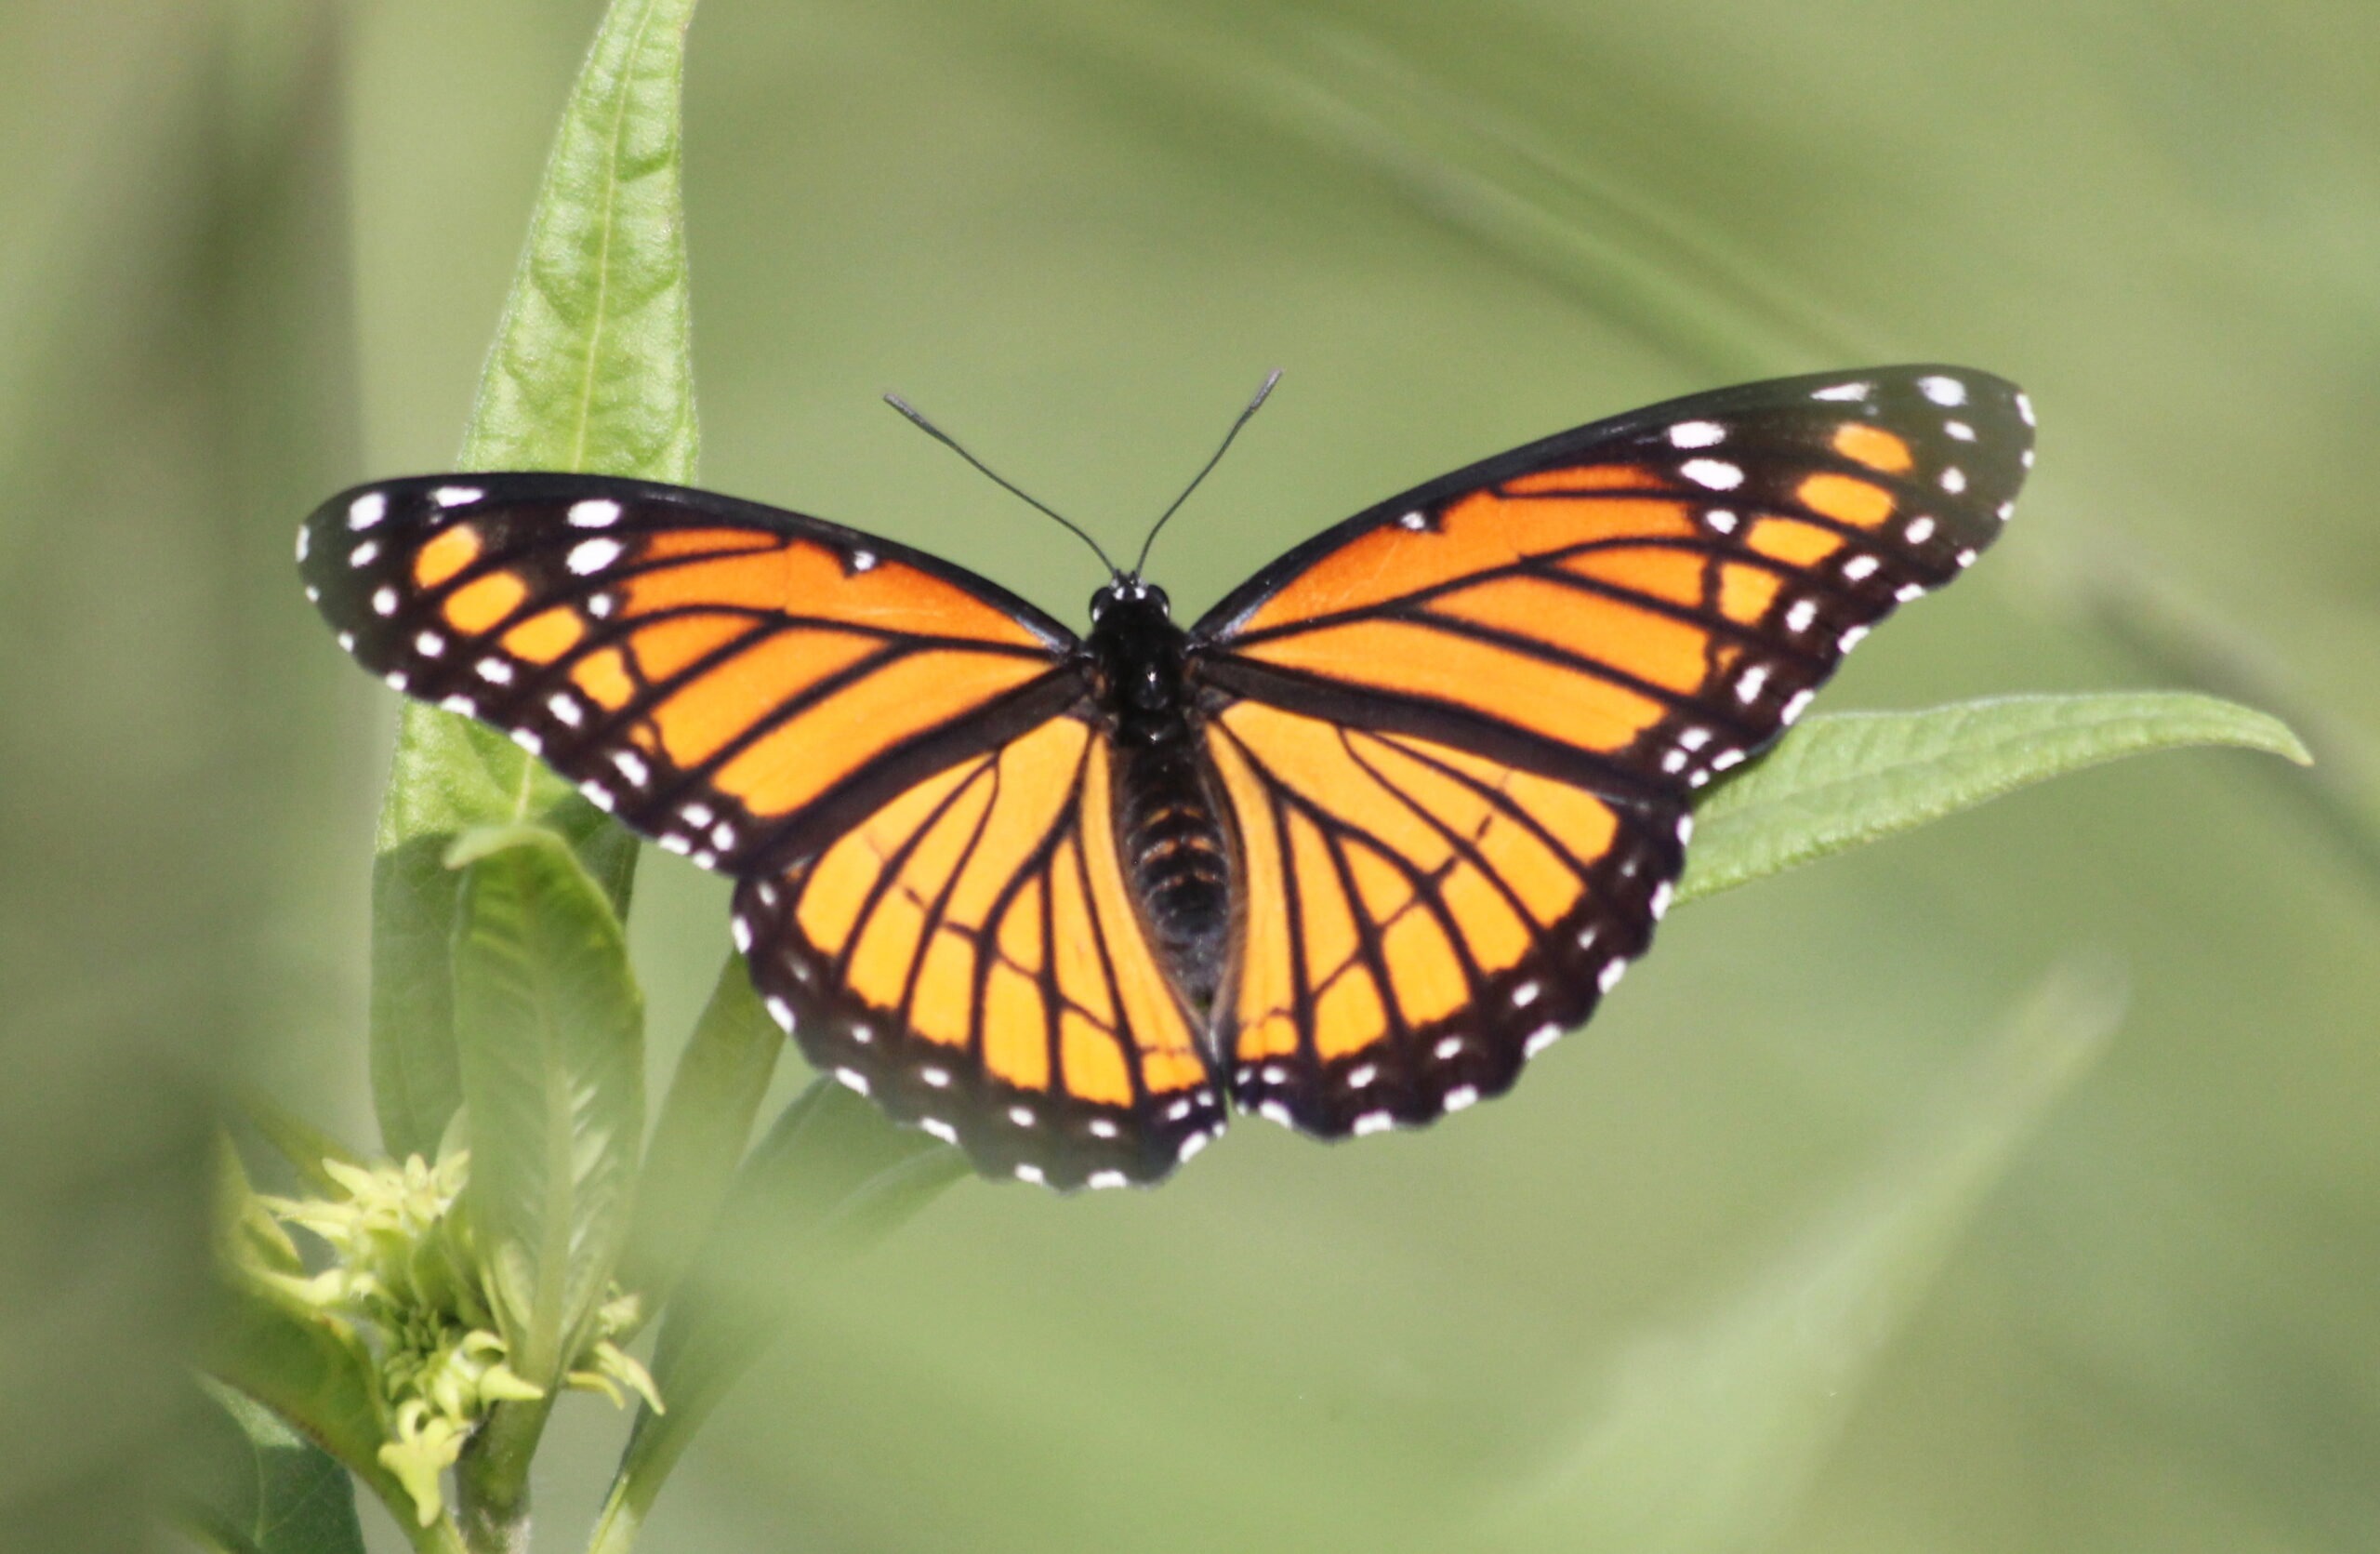 An orange, black, and white butterfly perches on a plant stem.